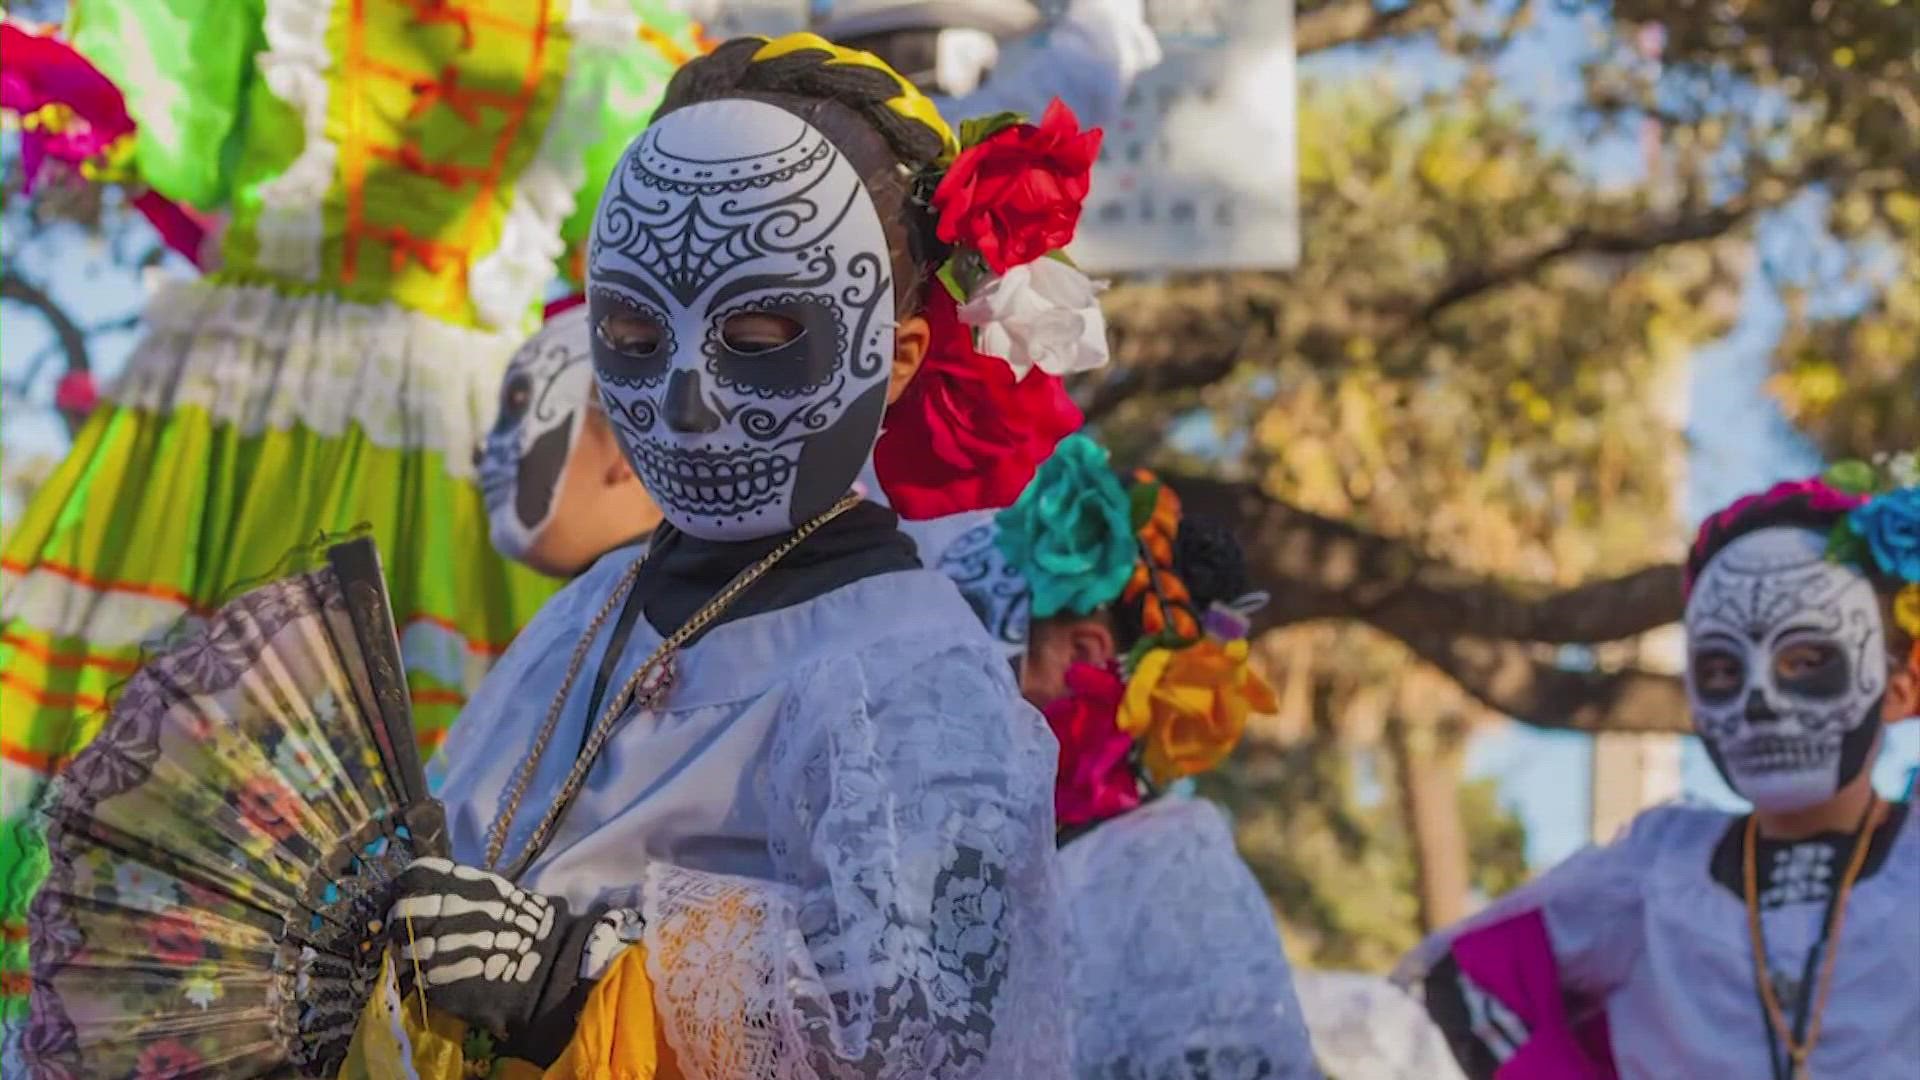 For the uninitiated Dia de los Muertos, also known as the Day of the Dead, is not the Mexican version of Halloween.